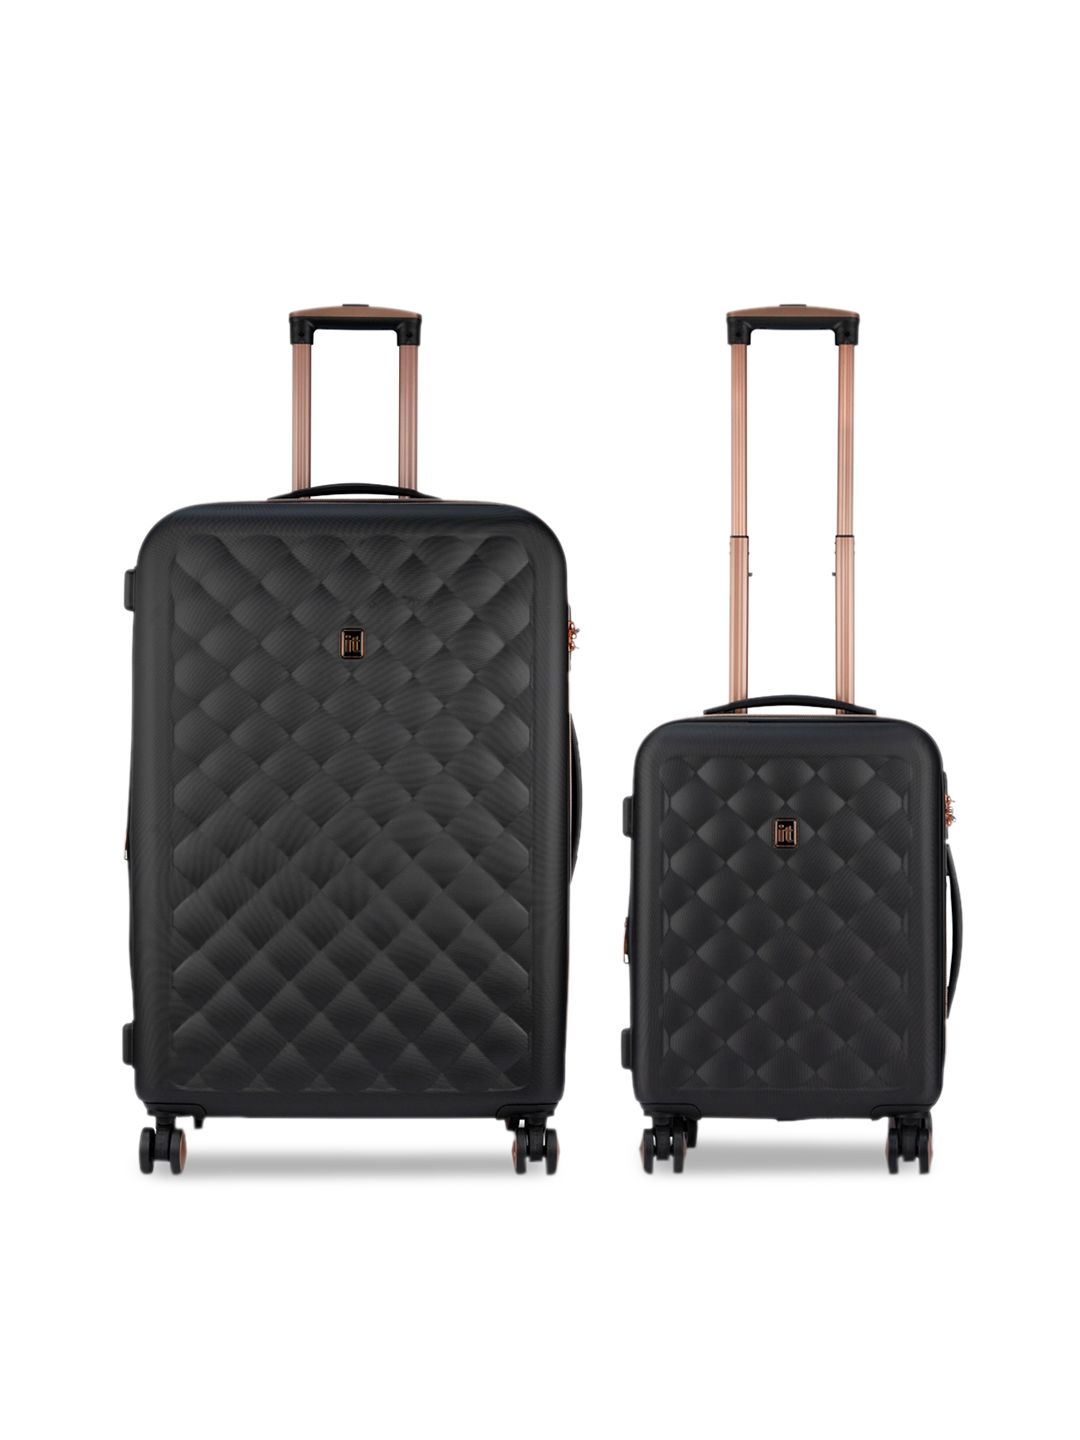 IT luggage Set Of 2 Black Textured Hard-Sided Trolley Suitcases Price in India